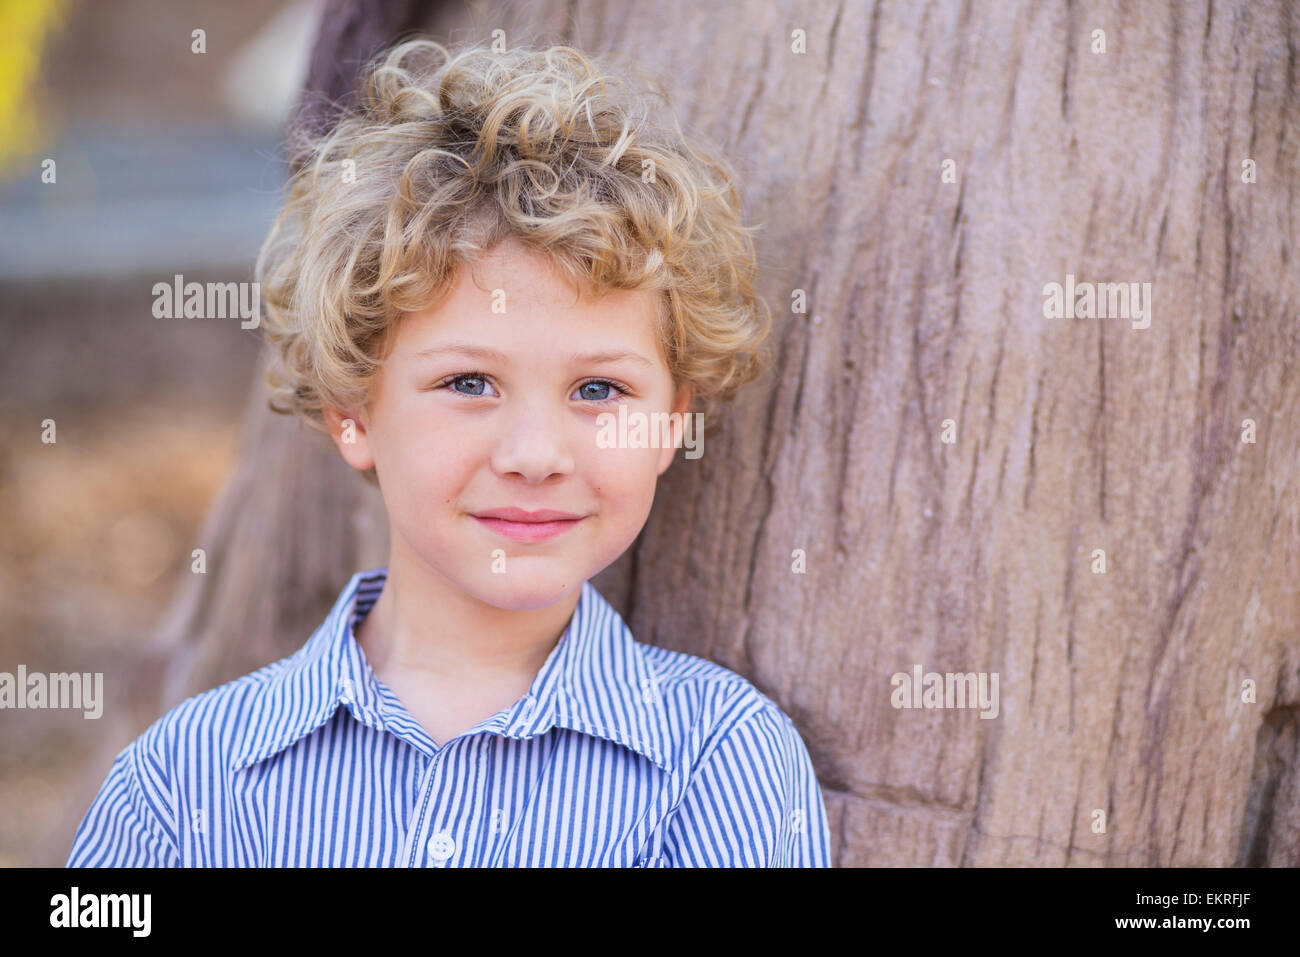 Portrait Of A Young Boy With Blond Curly Hair And Blue Eyes Stock